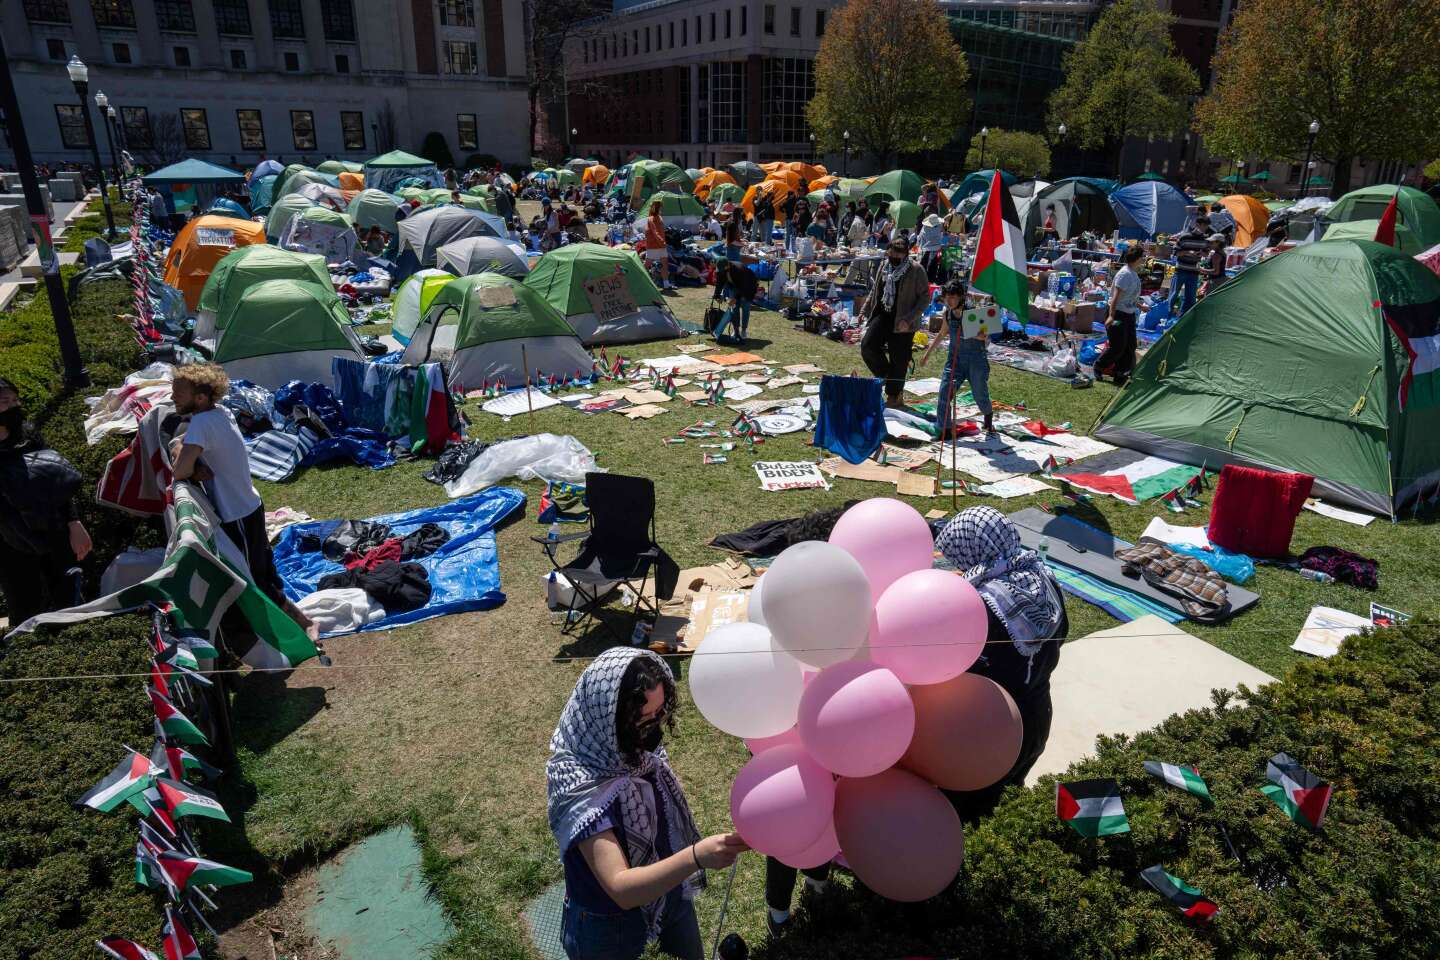 In the US, the Columbia campus is under siege in the wake of the war in Gaza.